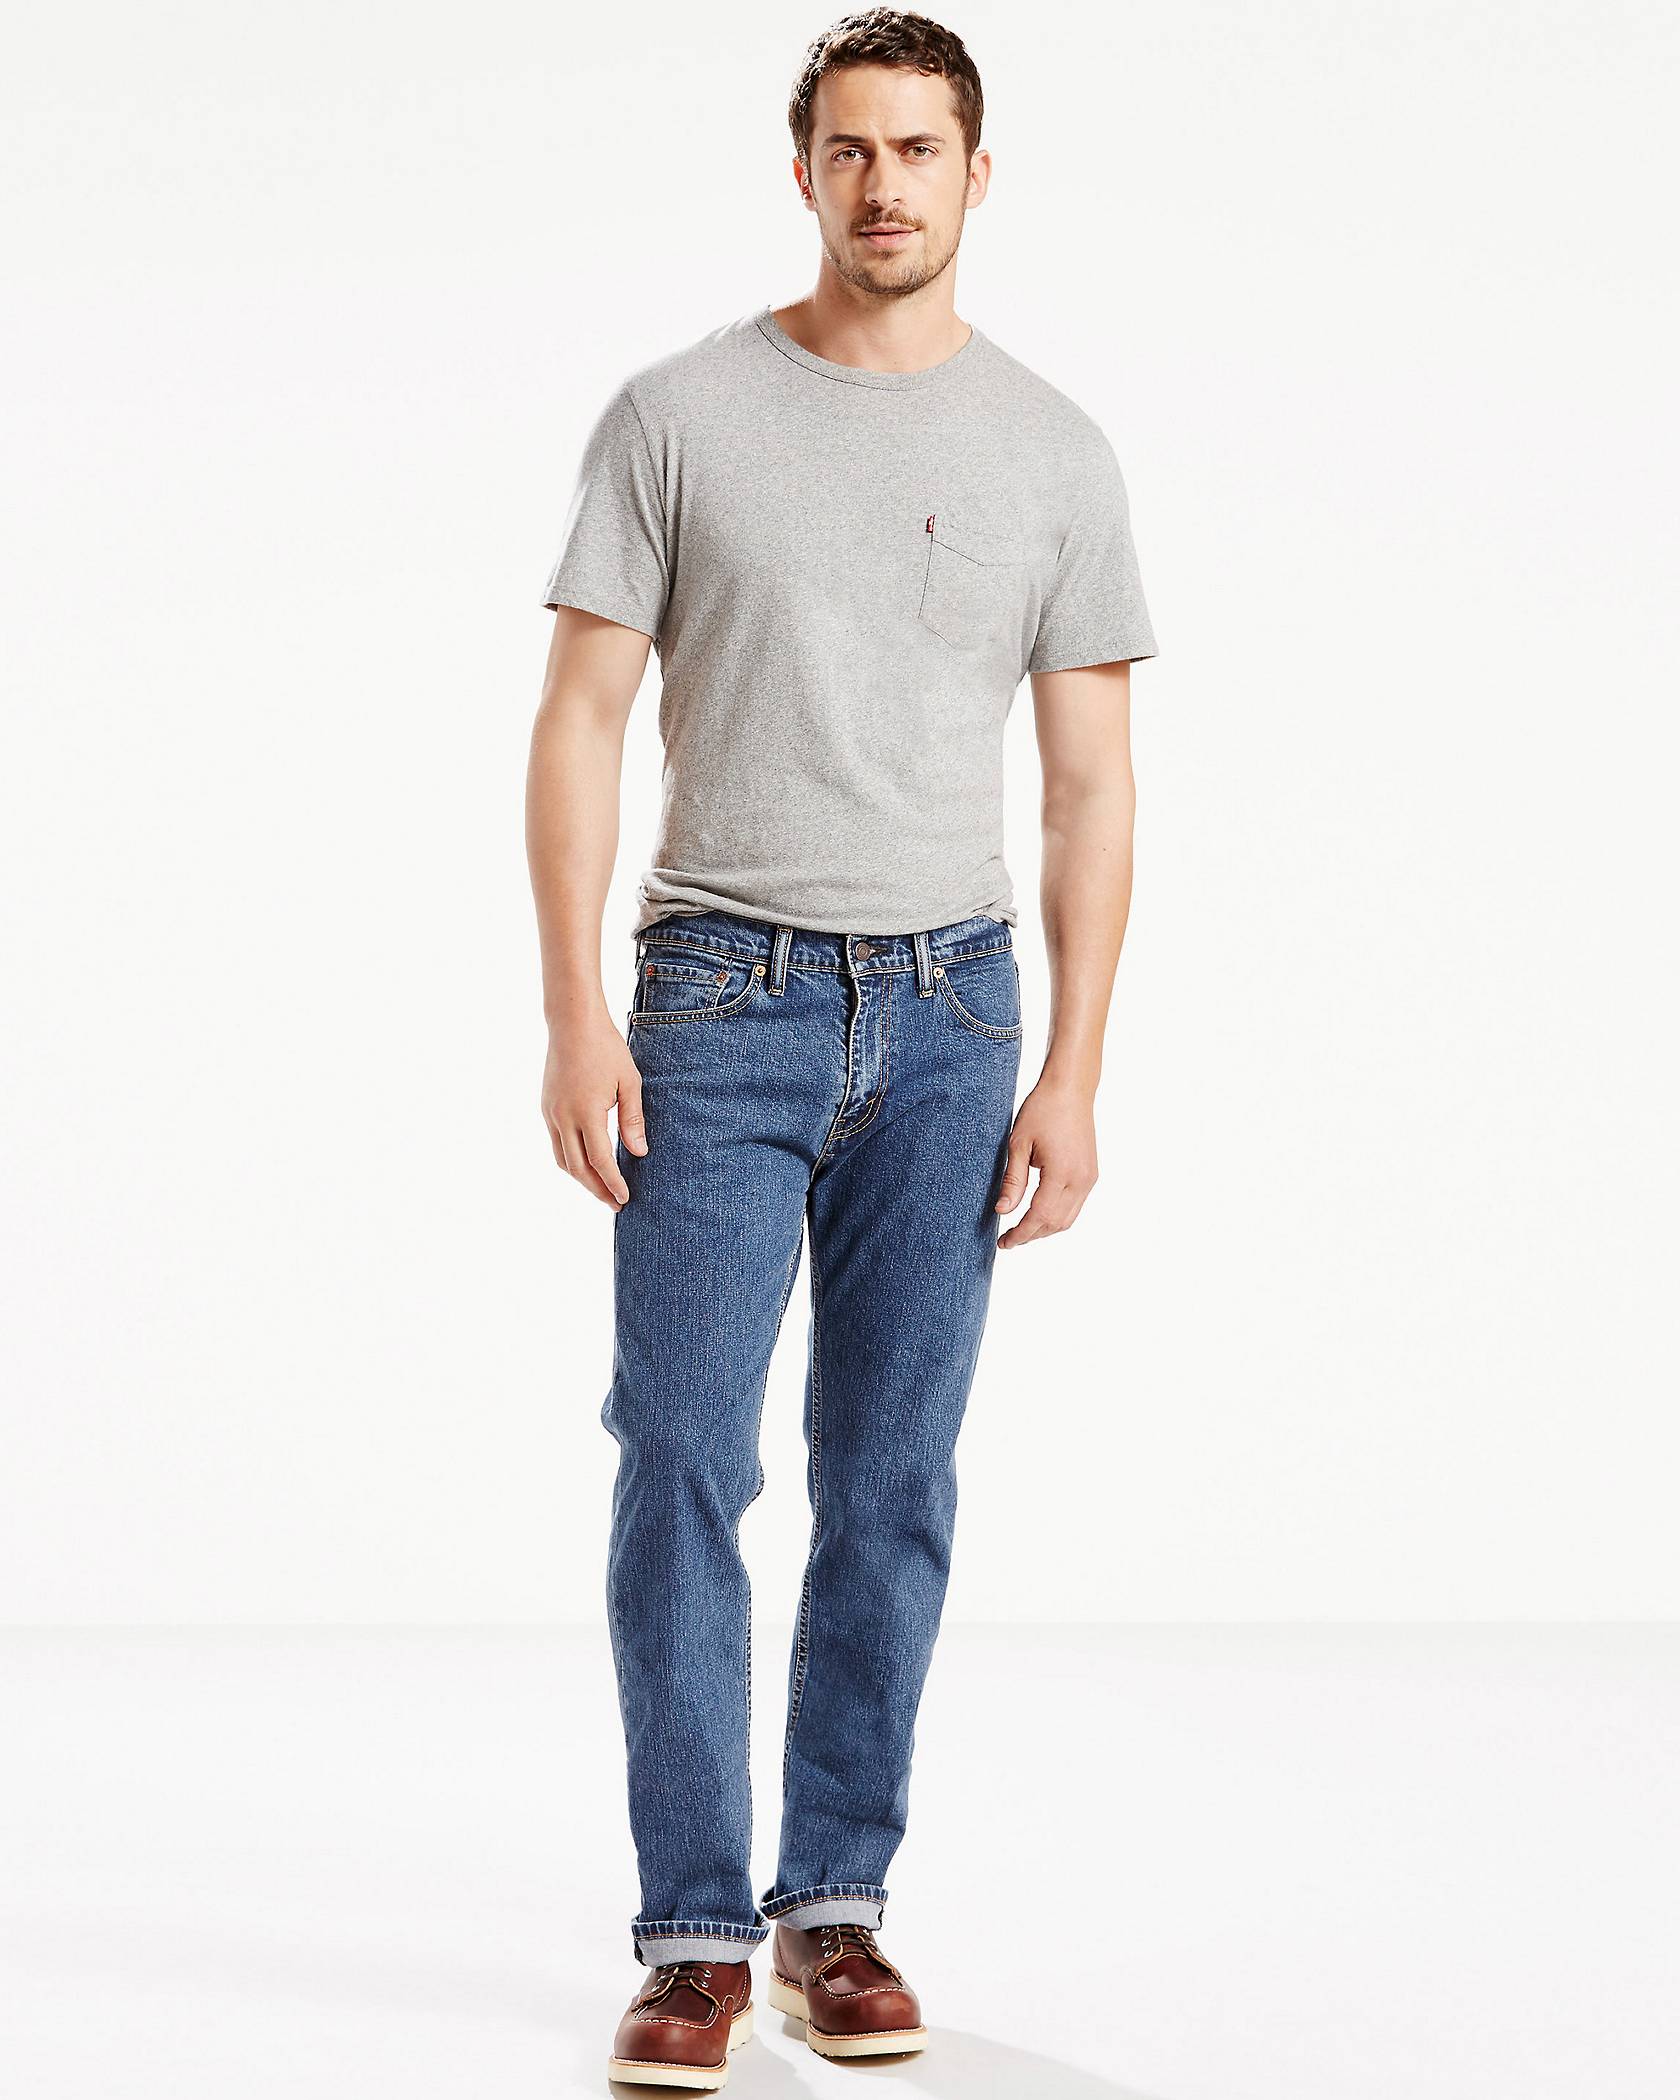 Men's Levi's Jeans, Ultimate Buying Guide